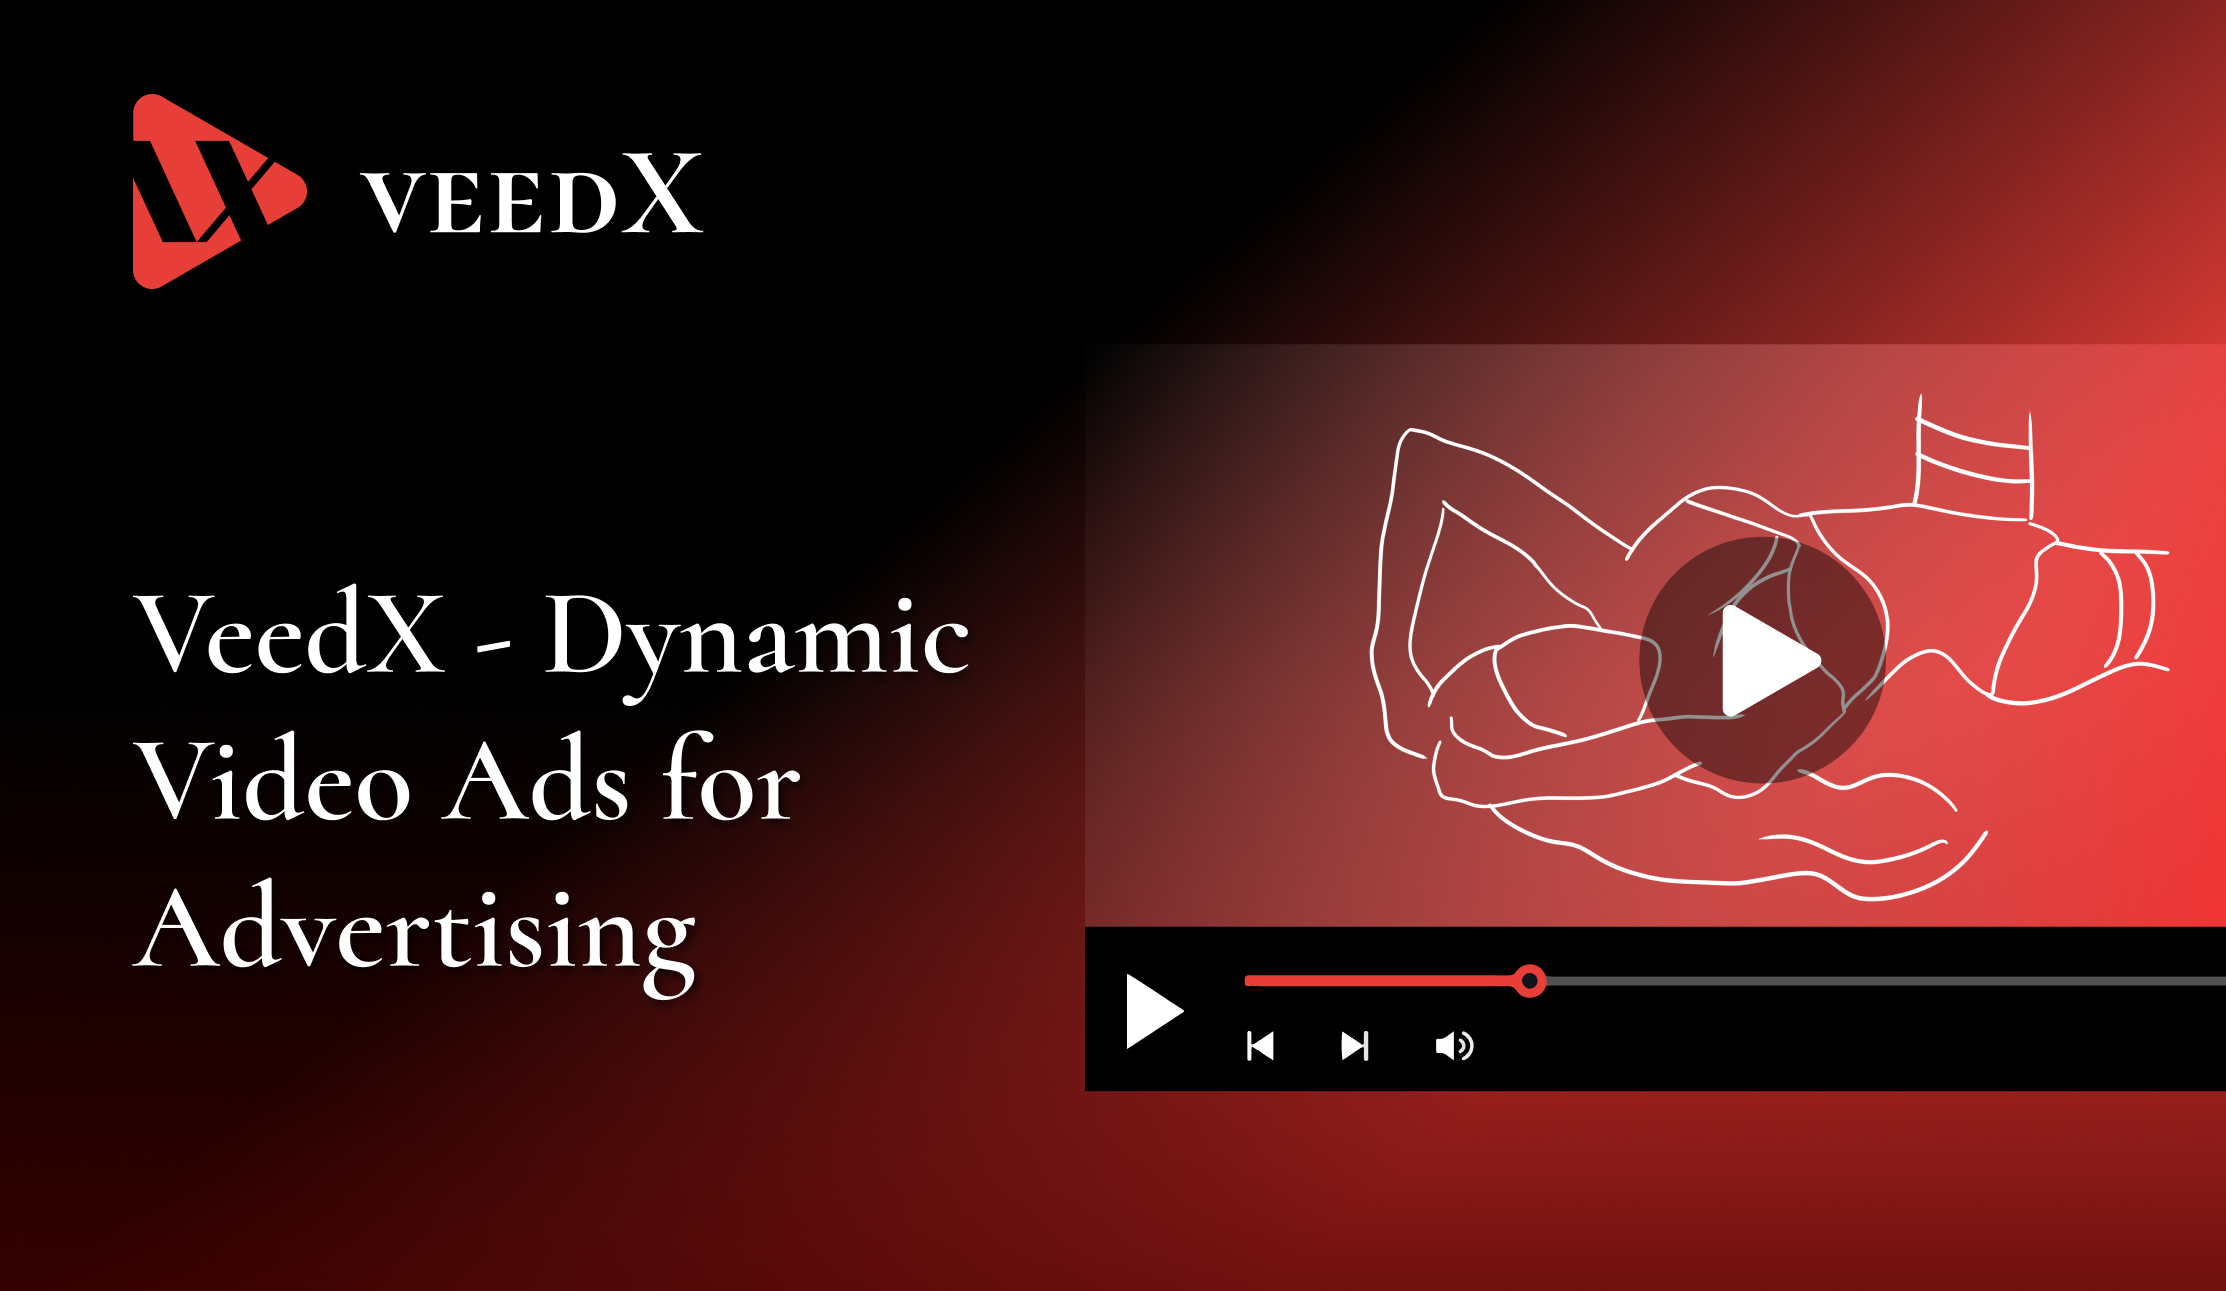 A Real Breakthrough in the Marketing Industry: the Latest Self-Serve Video Ad Network